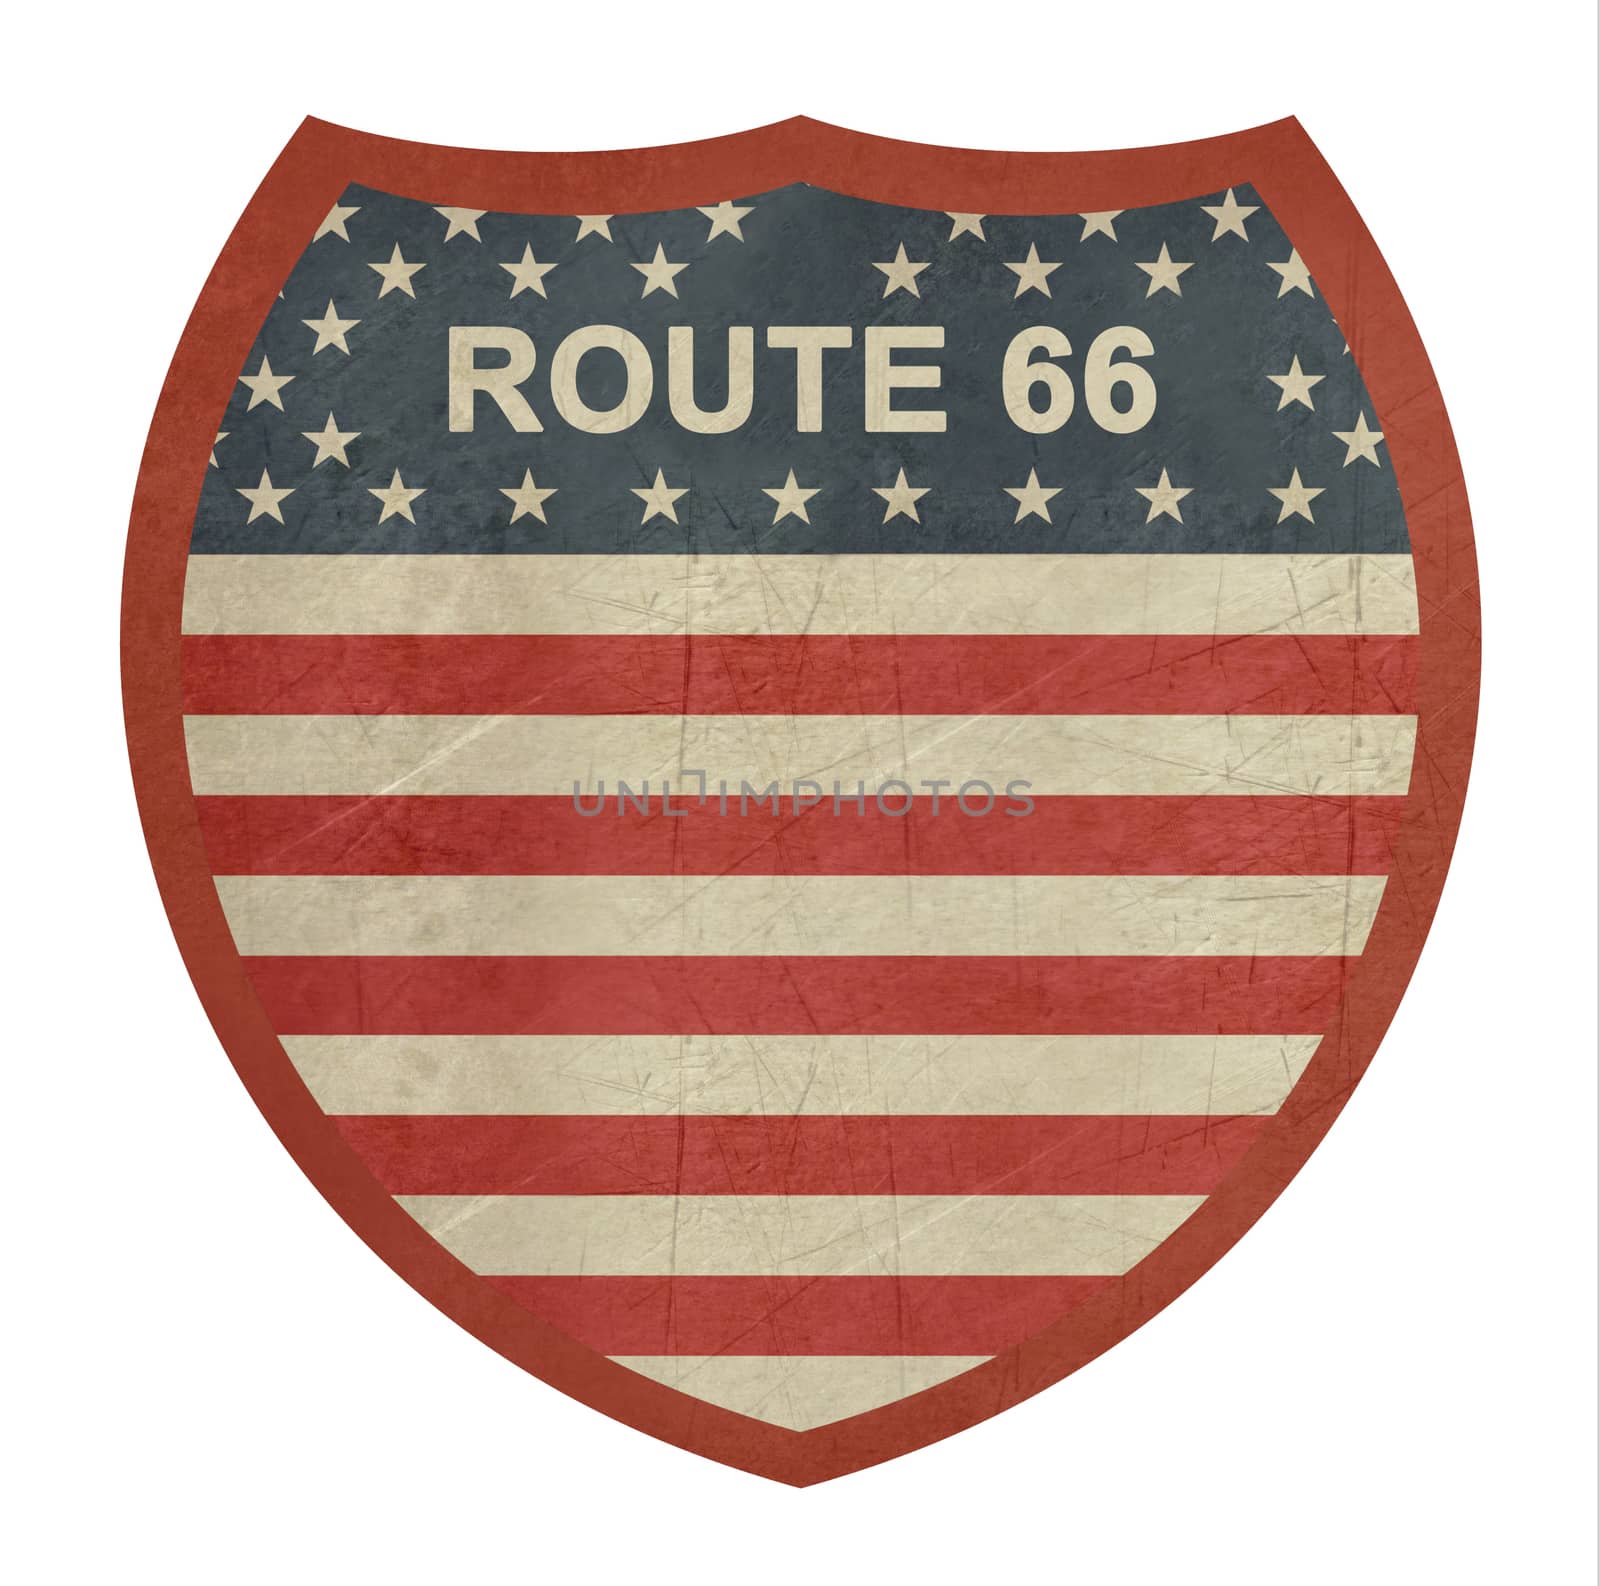 Grunge American route 66 highway sign by speedfighter